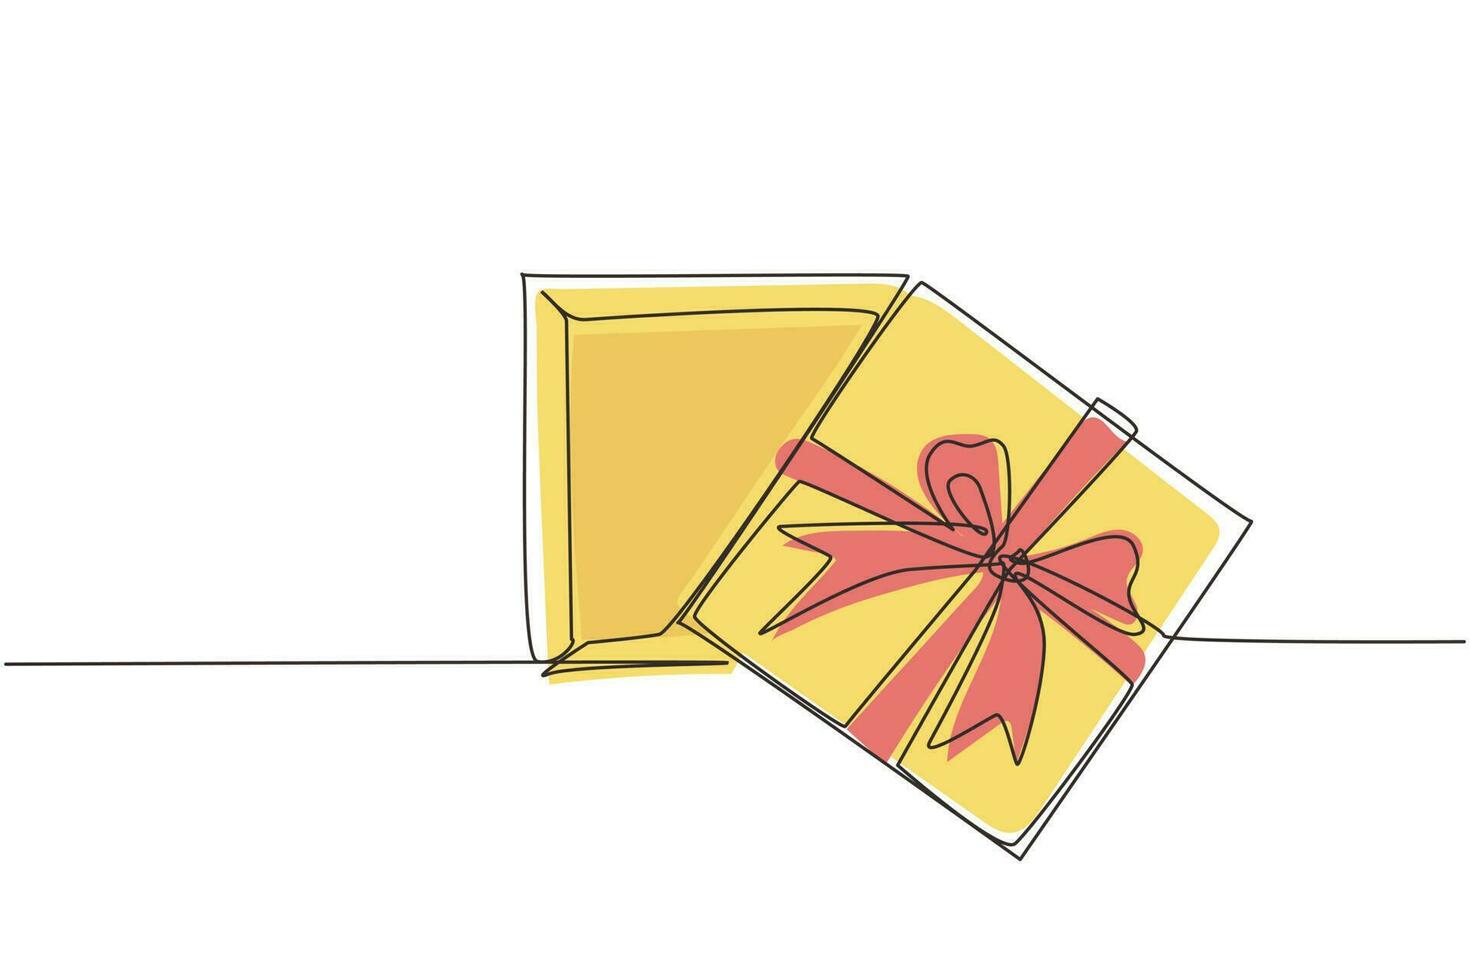 Single continuous line drawing top view open gift box and confetti. Enter to win prize. Present package with bursting element, surprise inside. Dynamic one line draw graphic design vector illustration